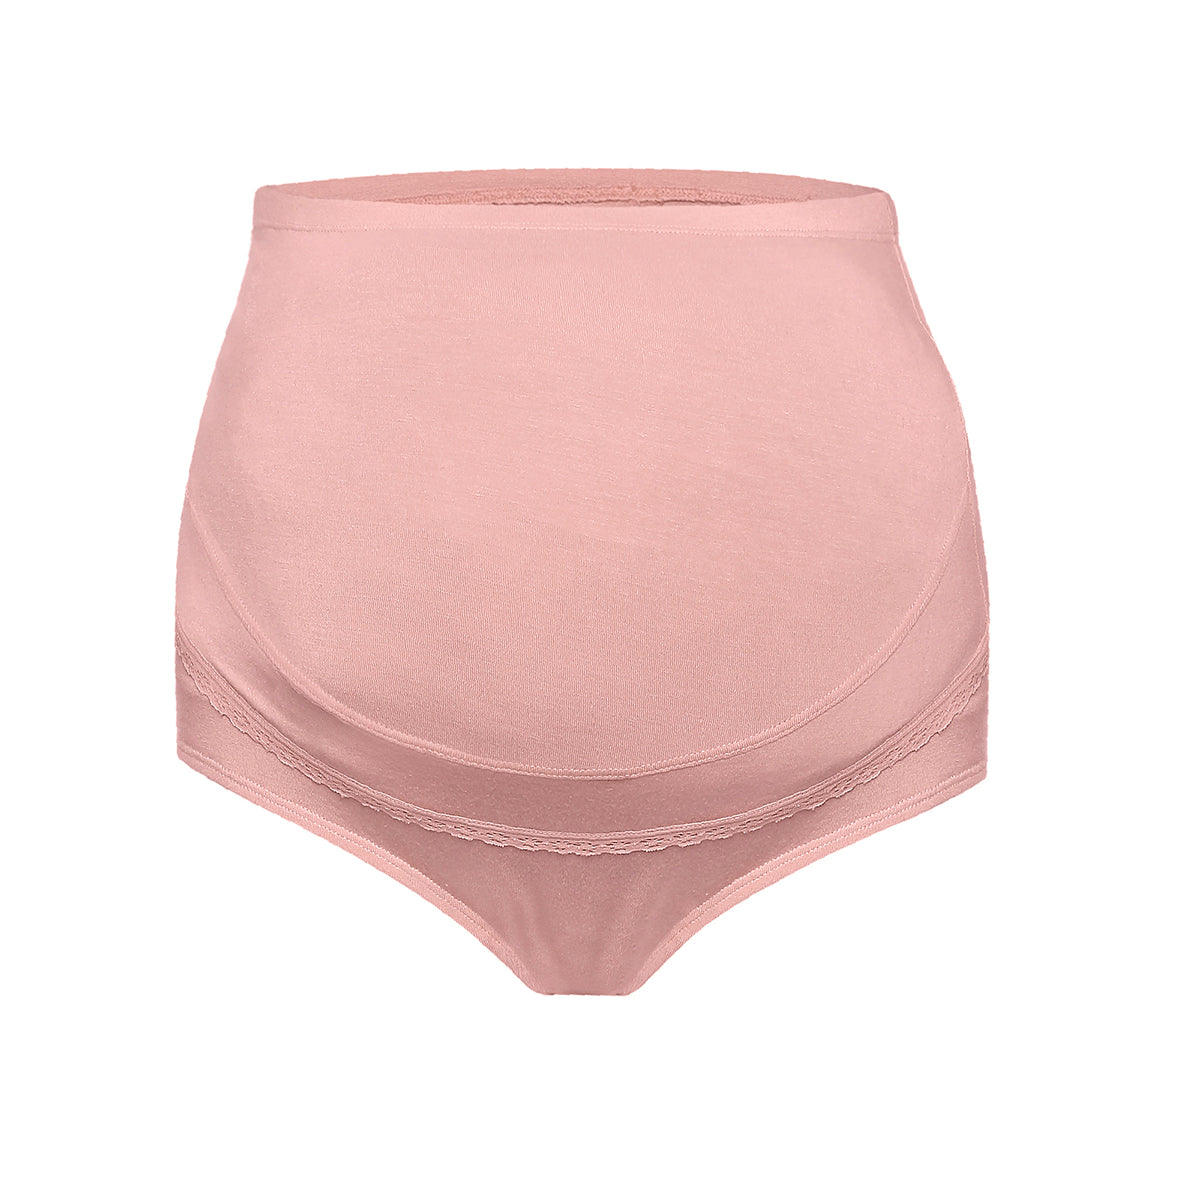 The Maternity Panty - Multicolor NYP244